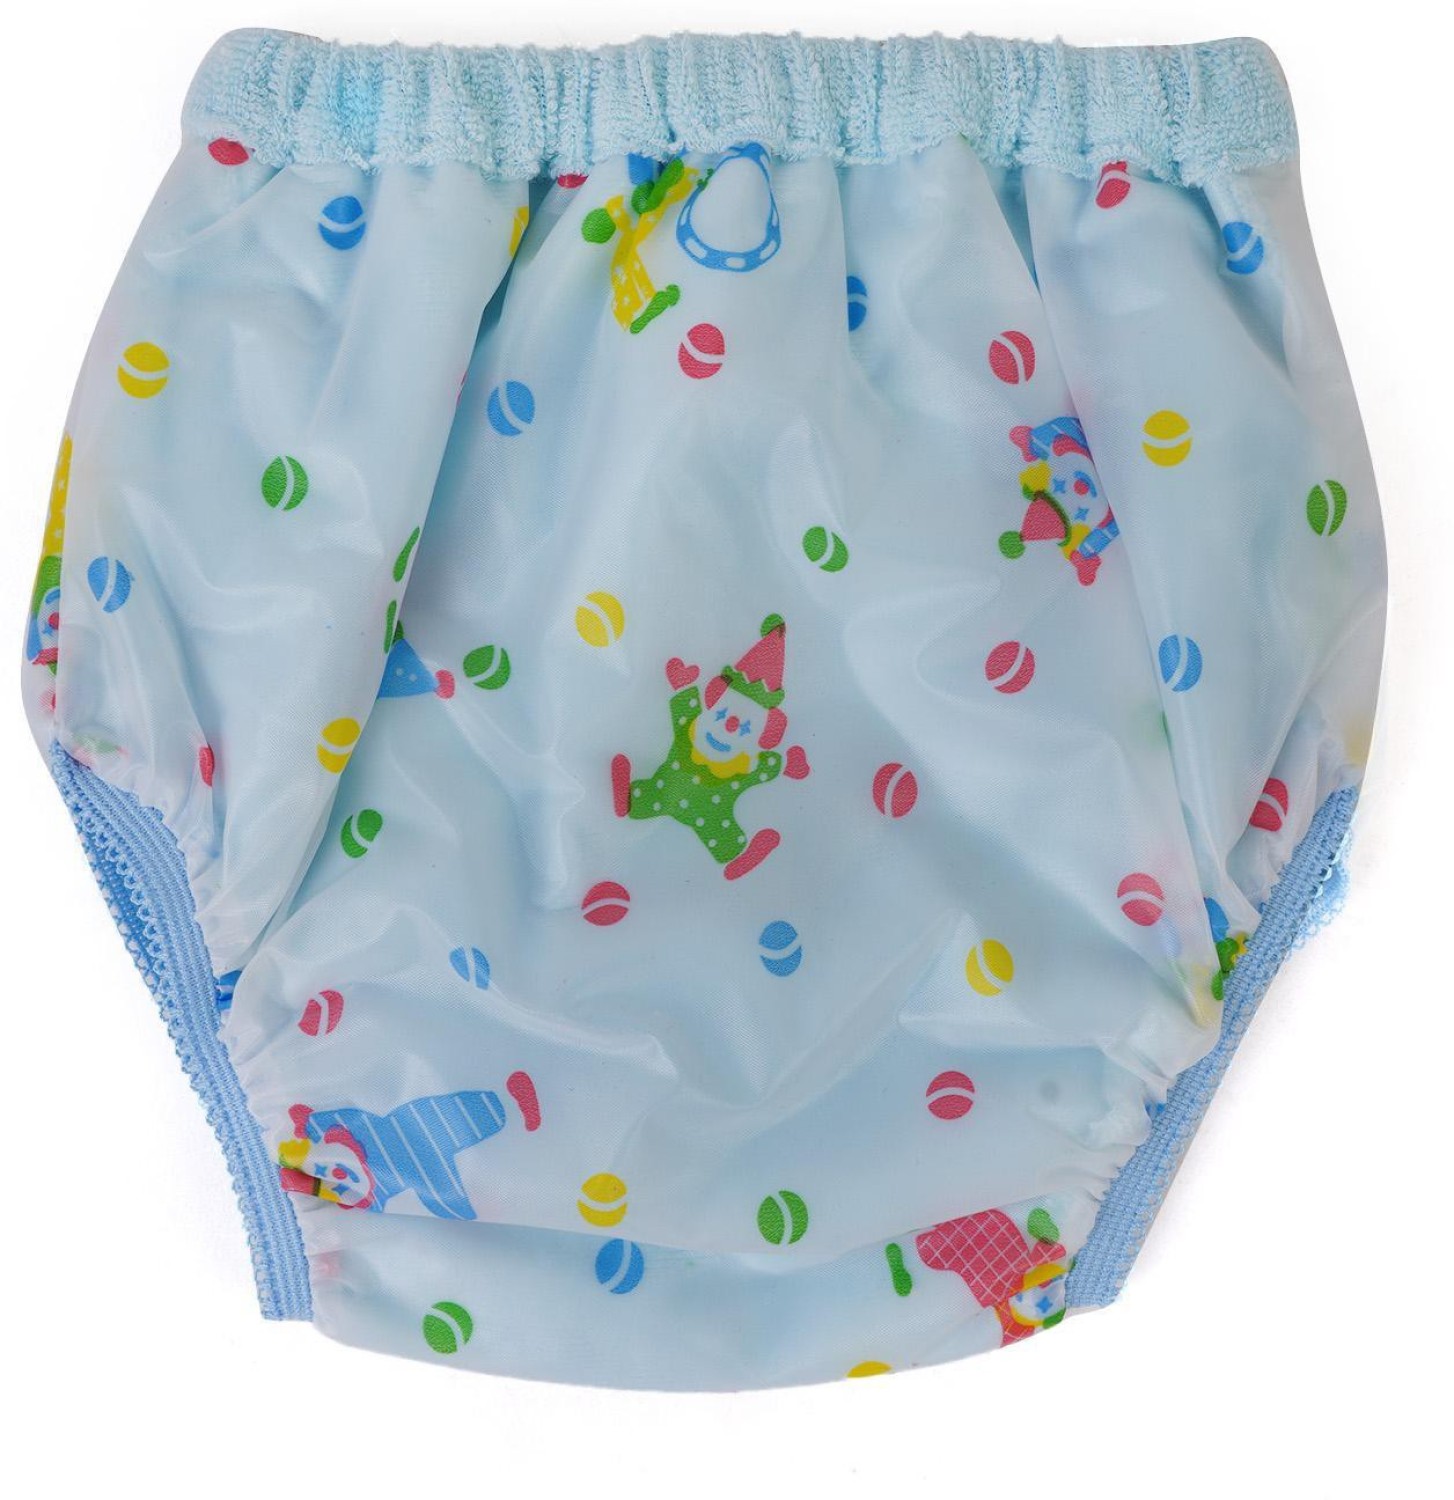 Da Anushi Kids PVC Diaper Joker Plastic Panty Baby Nappy Panty Training  Pants with Inner absorbable Cloth & Outer Plastic Reusable & Waterproof  pants, plastic panties, diaper covers, nappy covers, nappy wraps